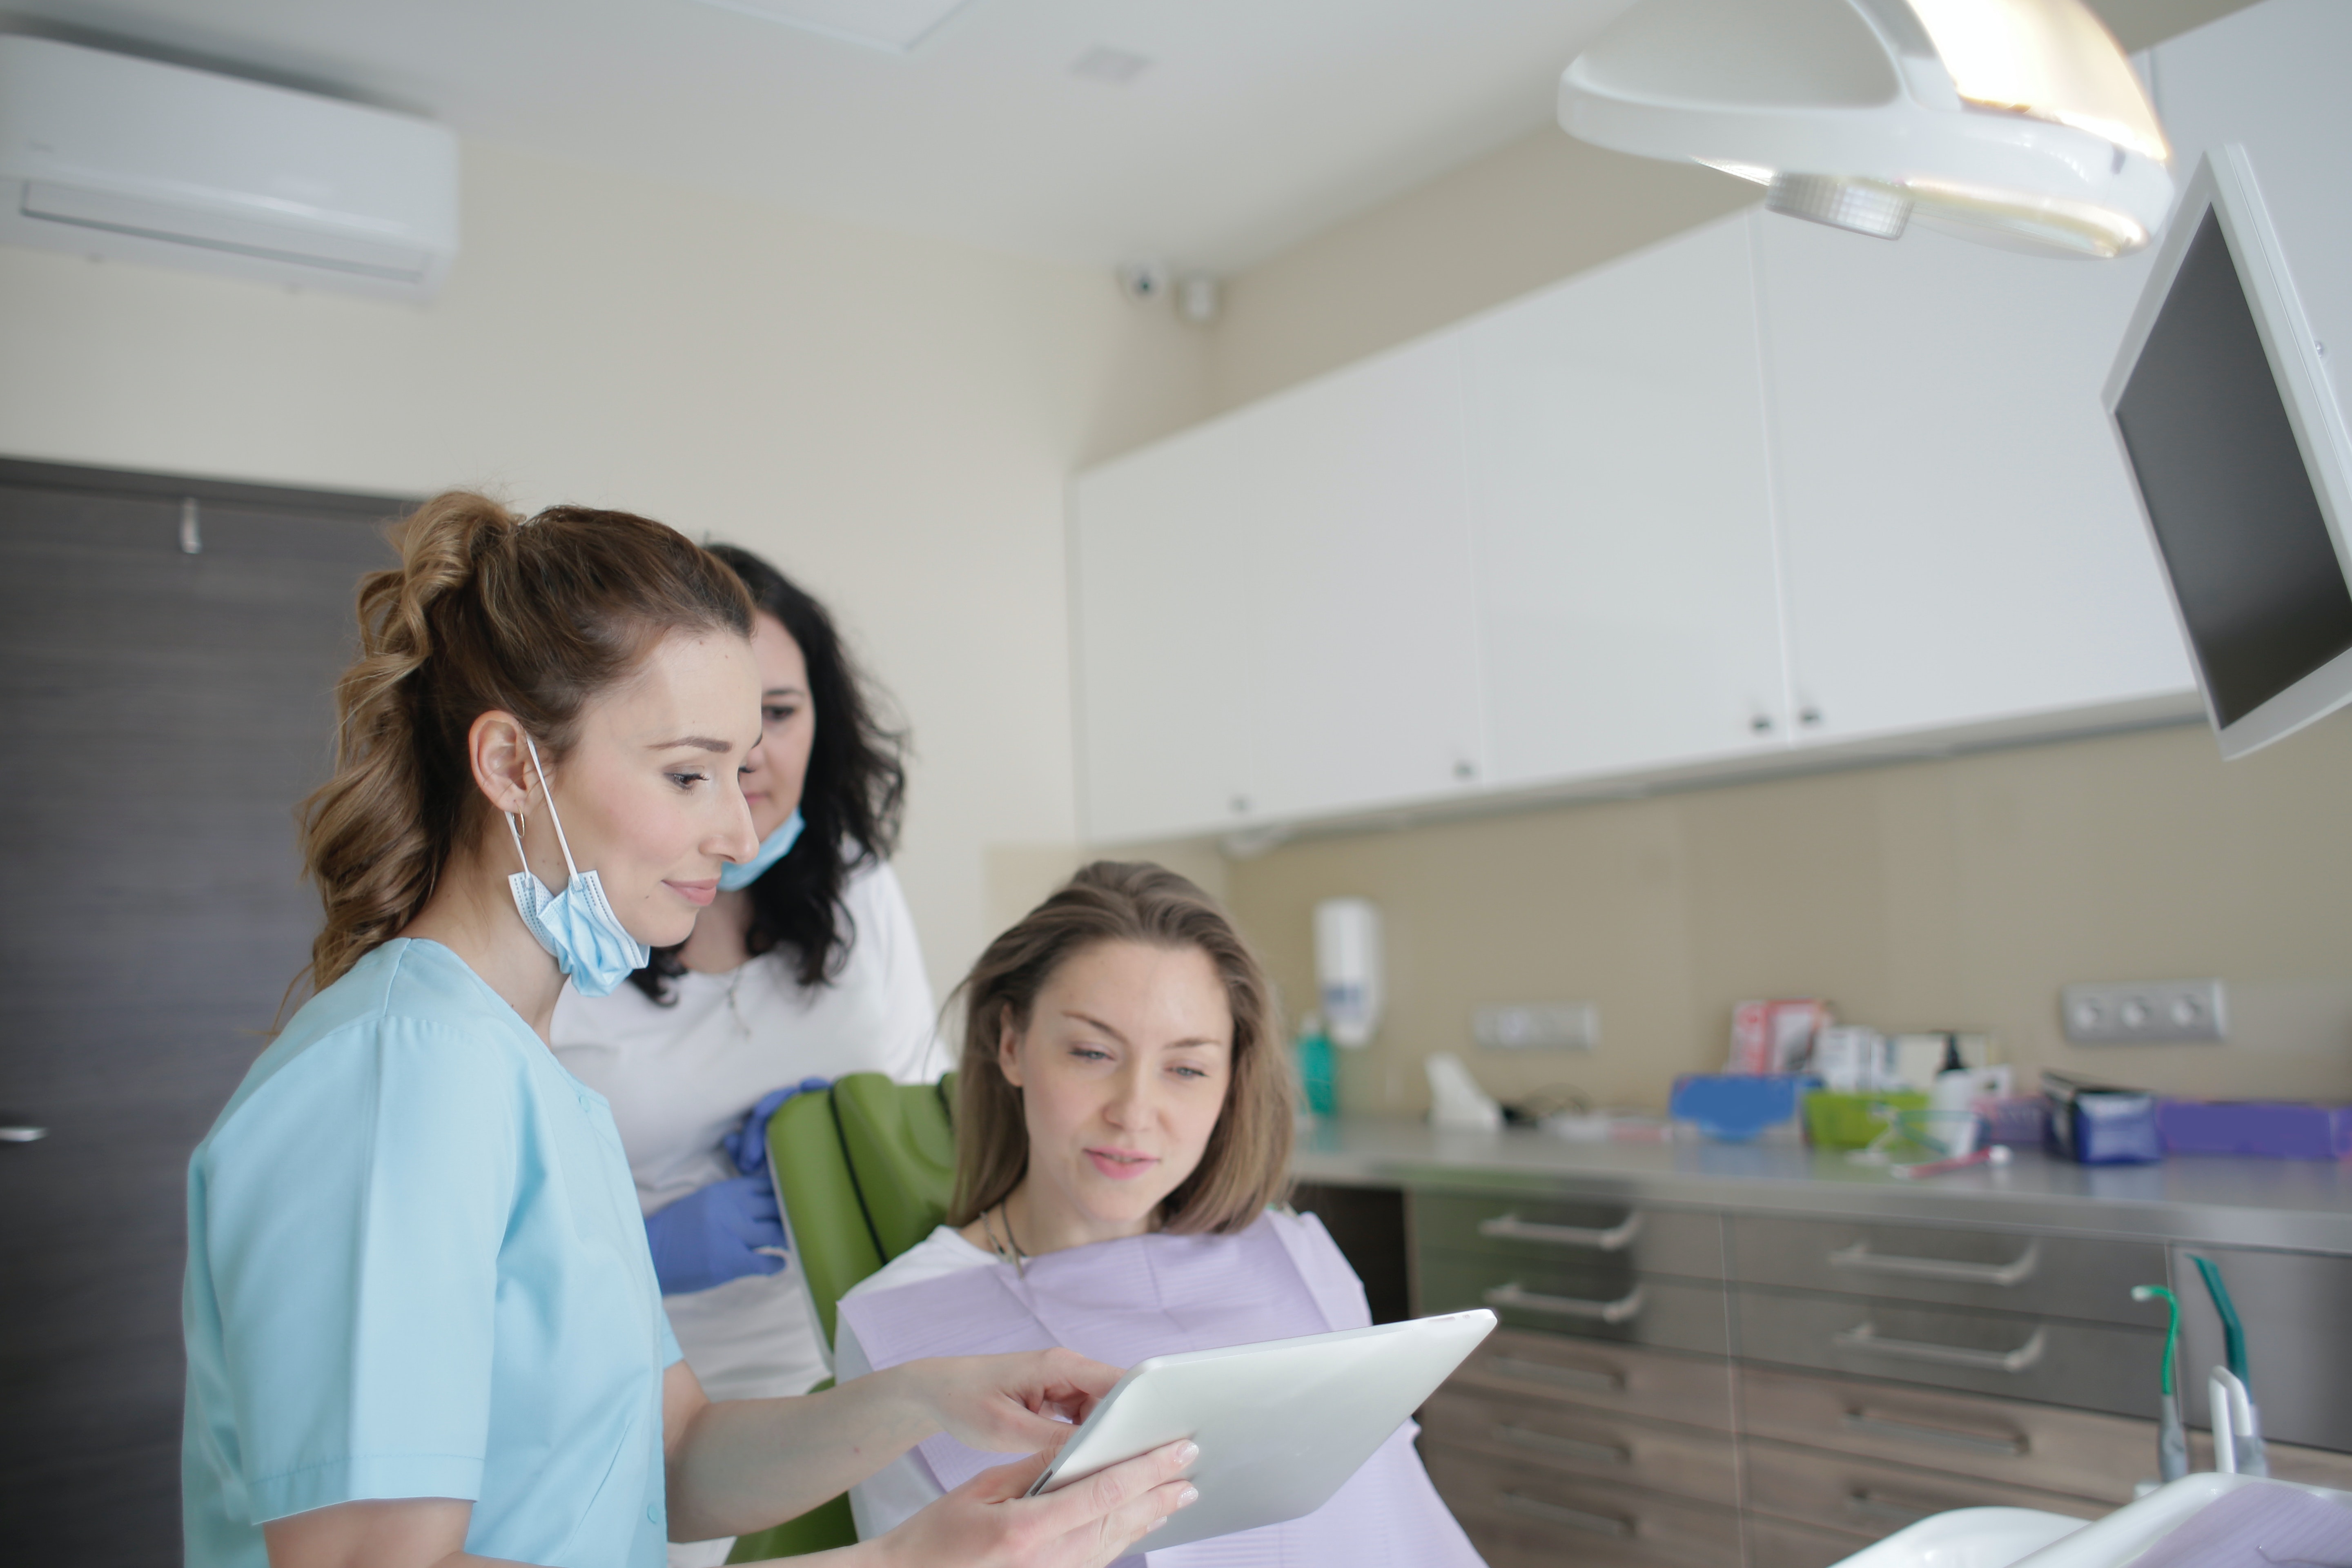 Dentist consulting woman on dental implant process